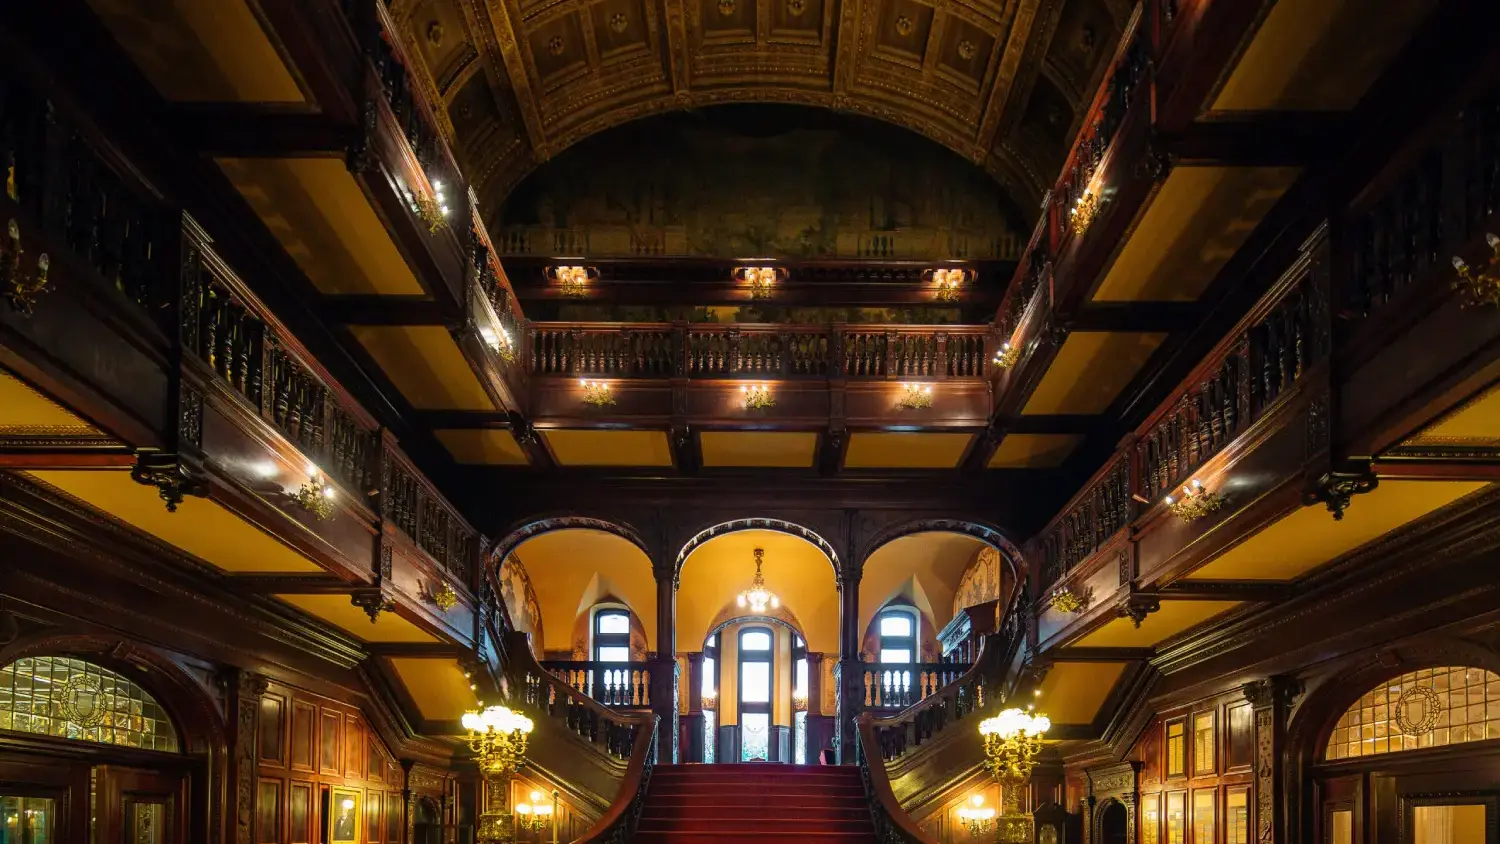 View of the Grand staircase in Greys Tower Castle